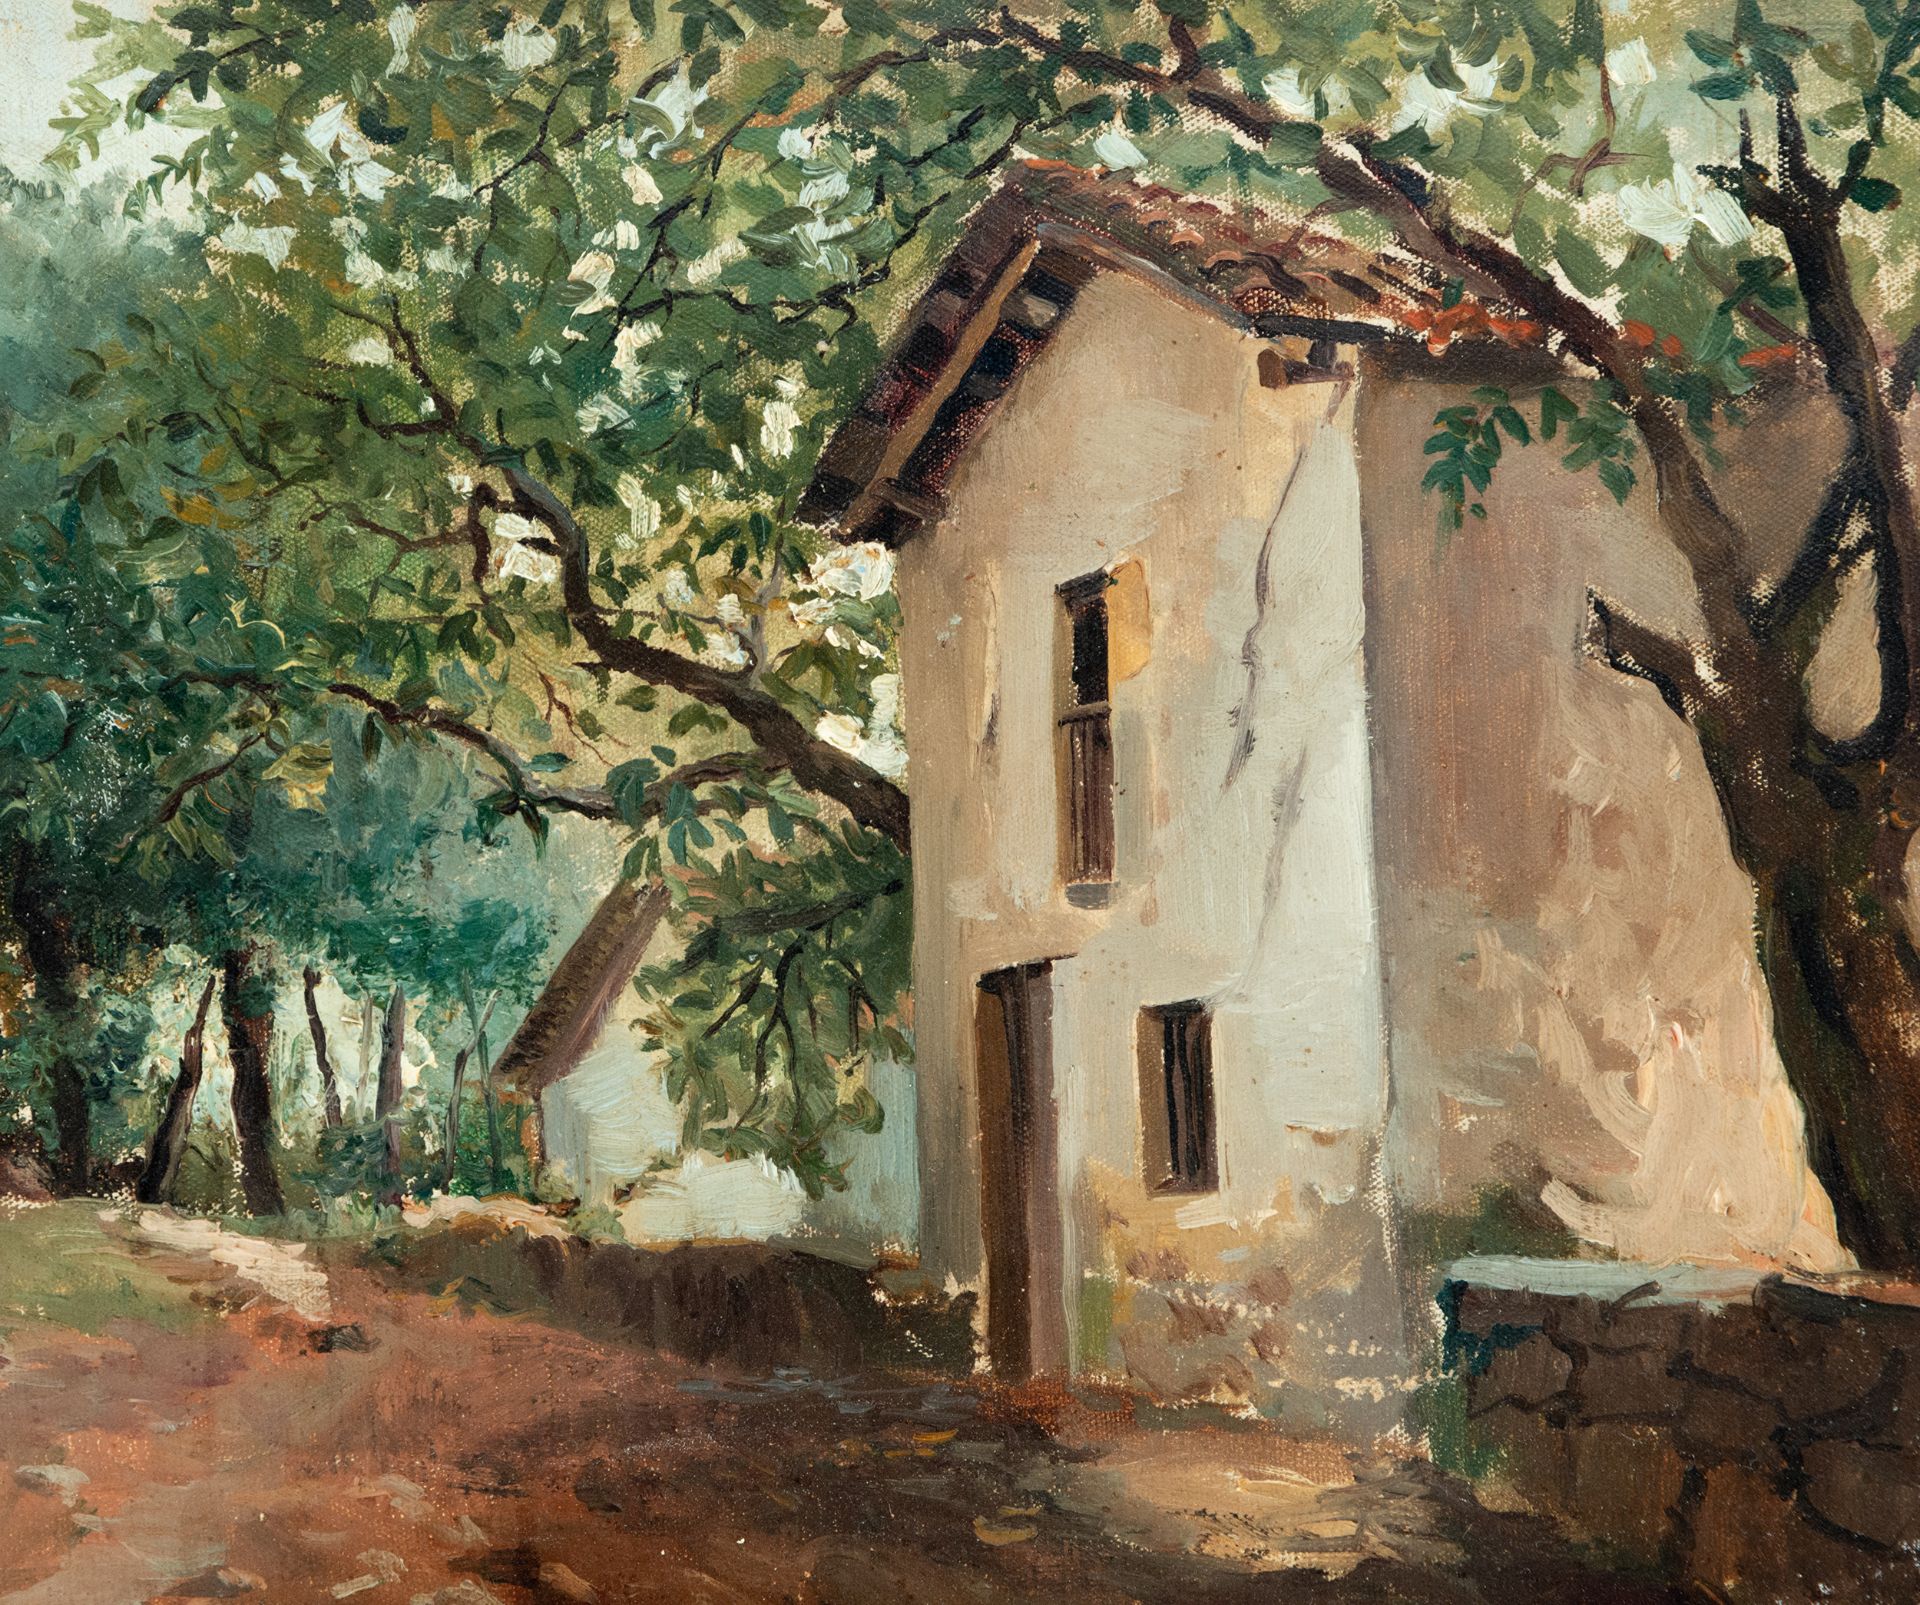 View of House in the Countryside, signed Forns, Spanish school of the 20th century - Image 2 of 4